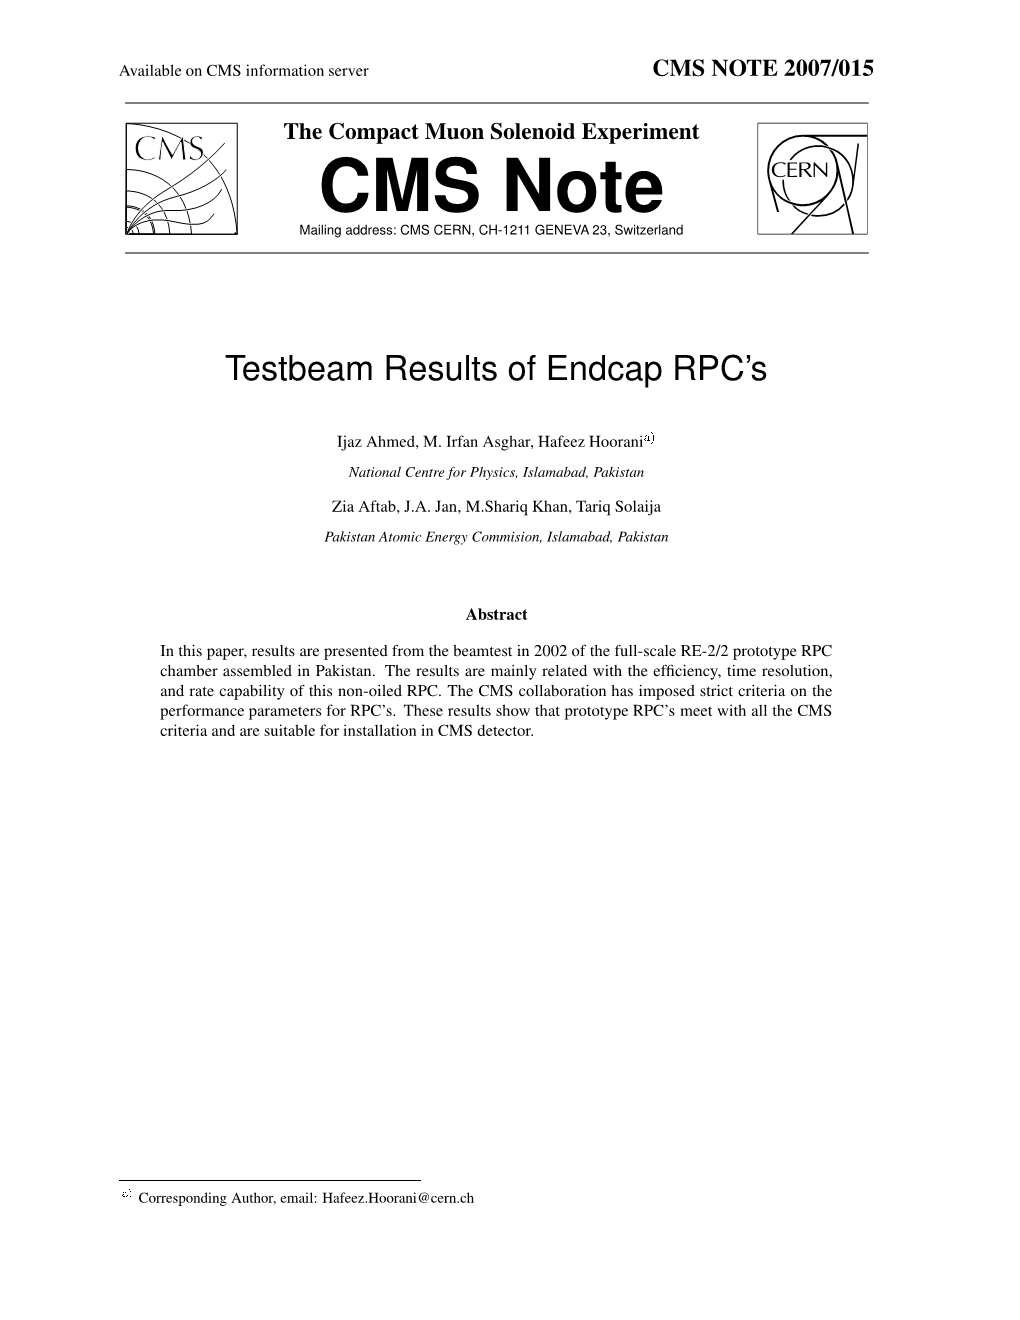 Testbeam Results of Endcap RPC's